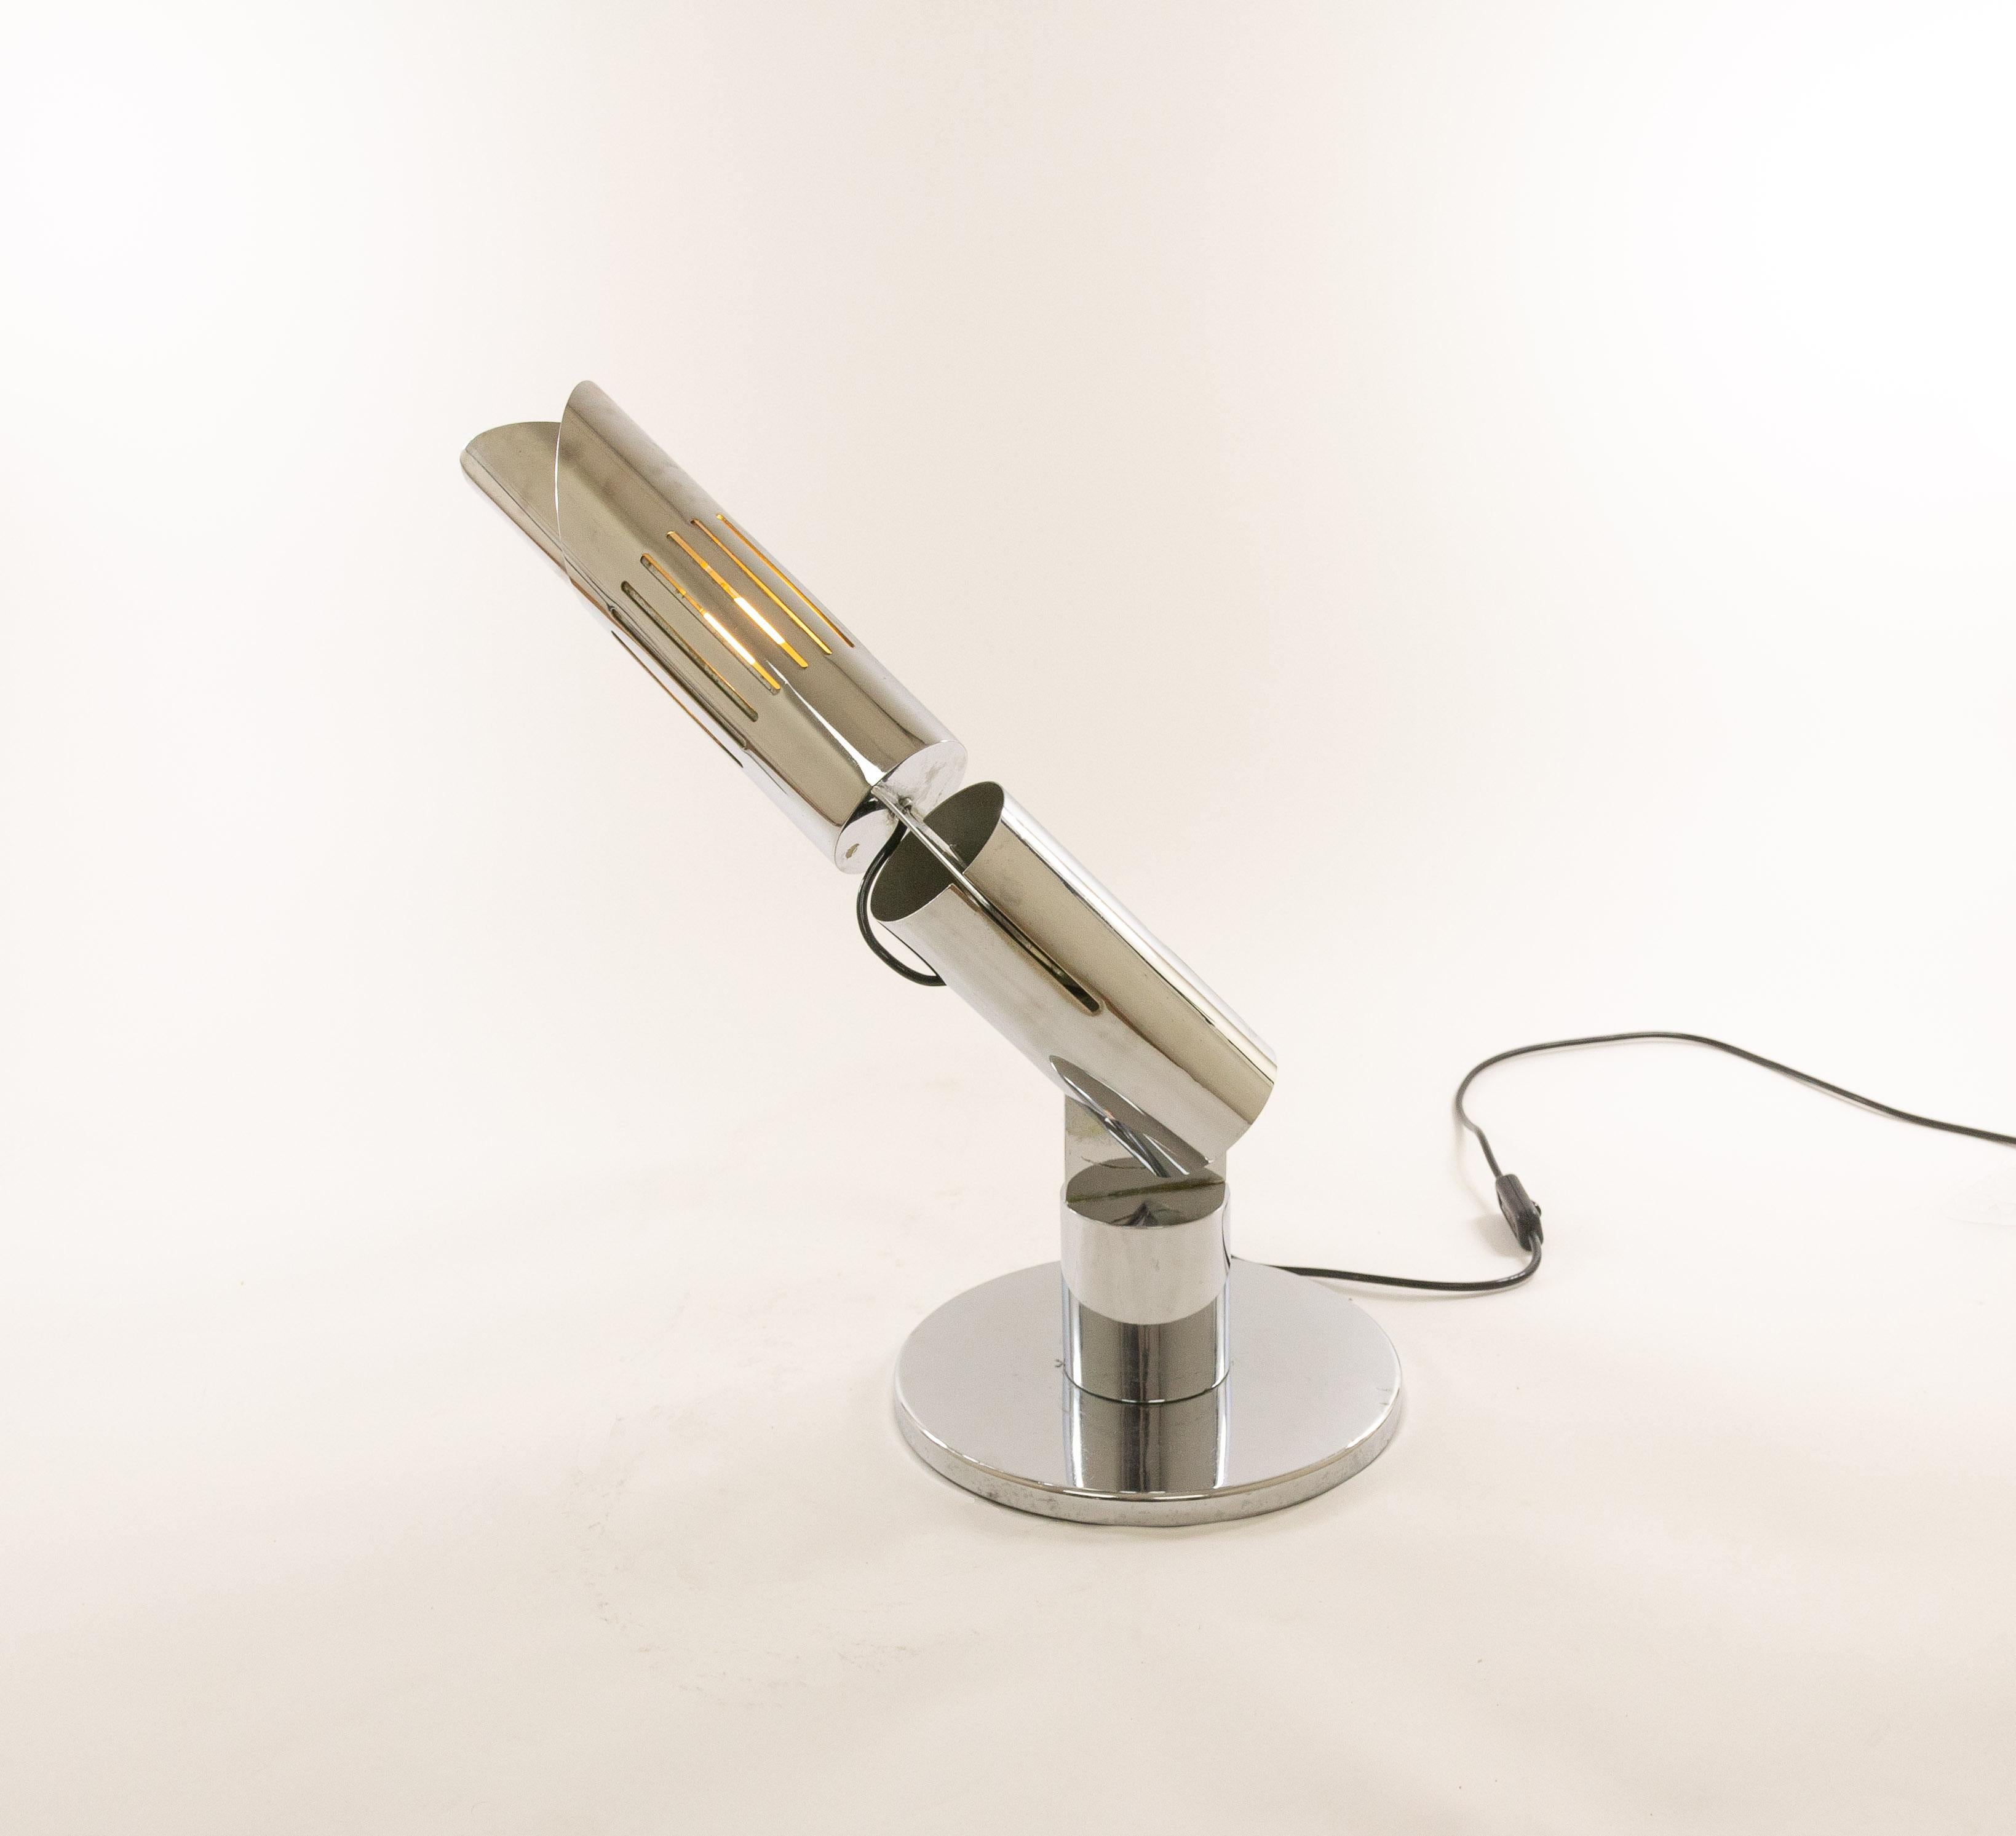 Chrome table lamp, model Cobra, designed by Gabriele D'ali in 1968 and produced by Francesconi.

This striking Cobra table lamp can be directed in every direction as the different chrome parts are connected by metal hinges. The rather heavy base